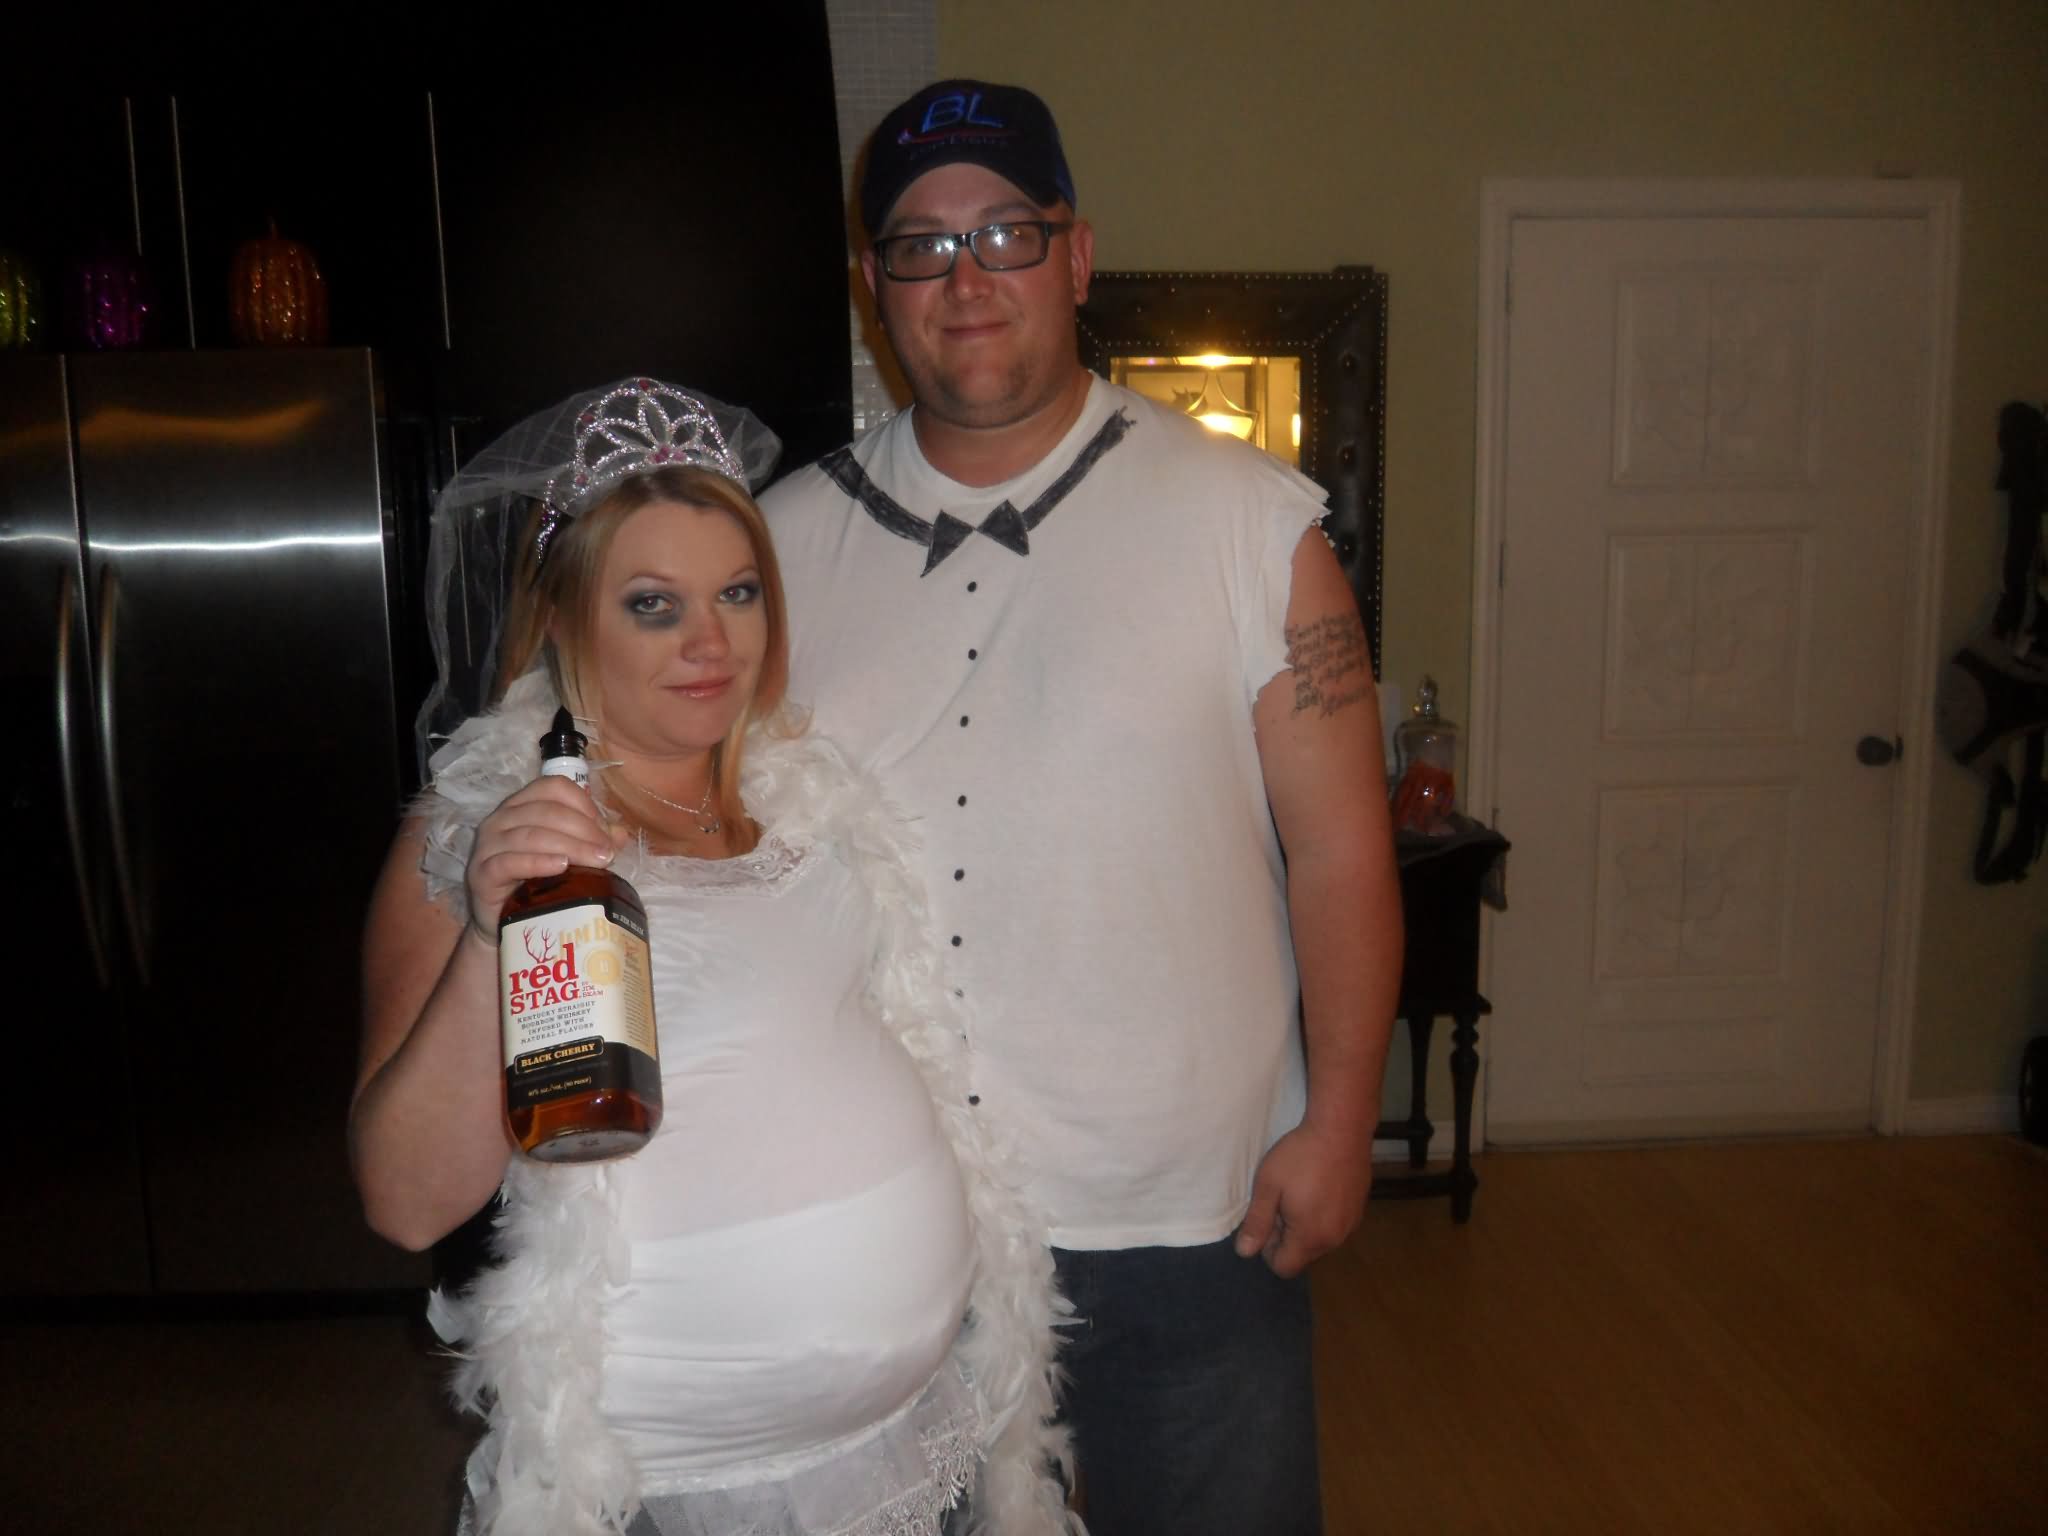 Funny White Trash Bride And Groom Image.